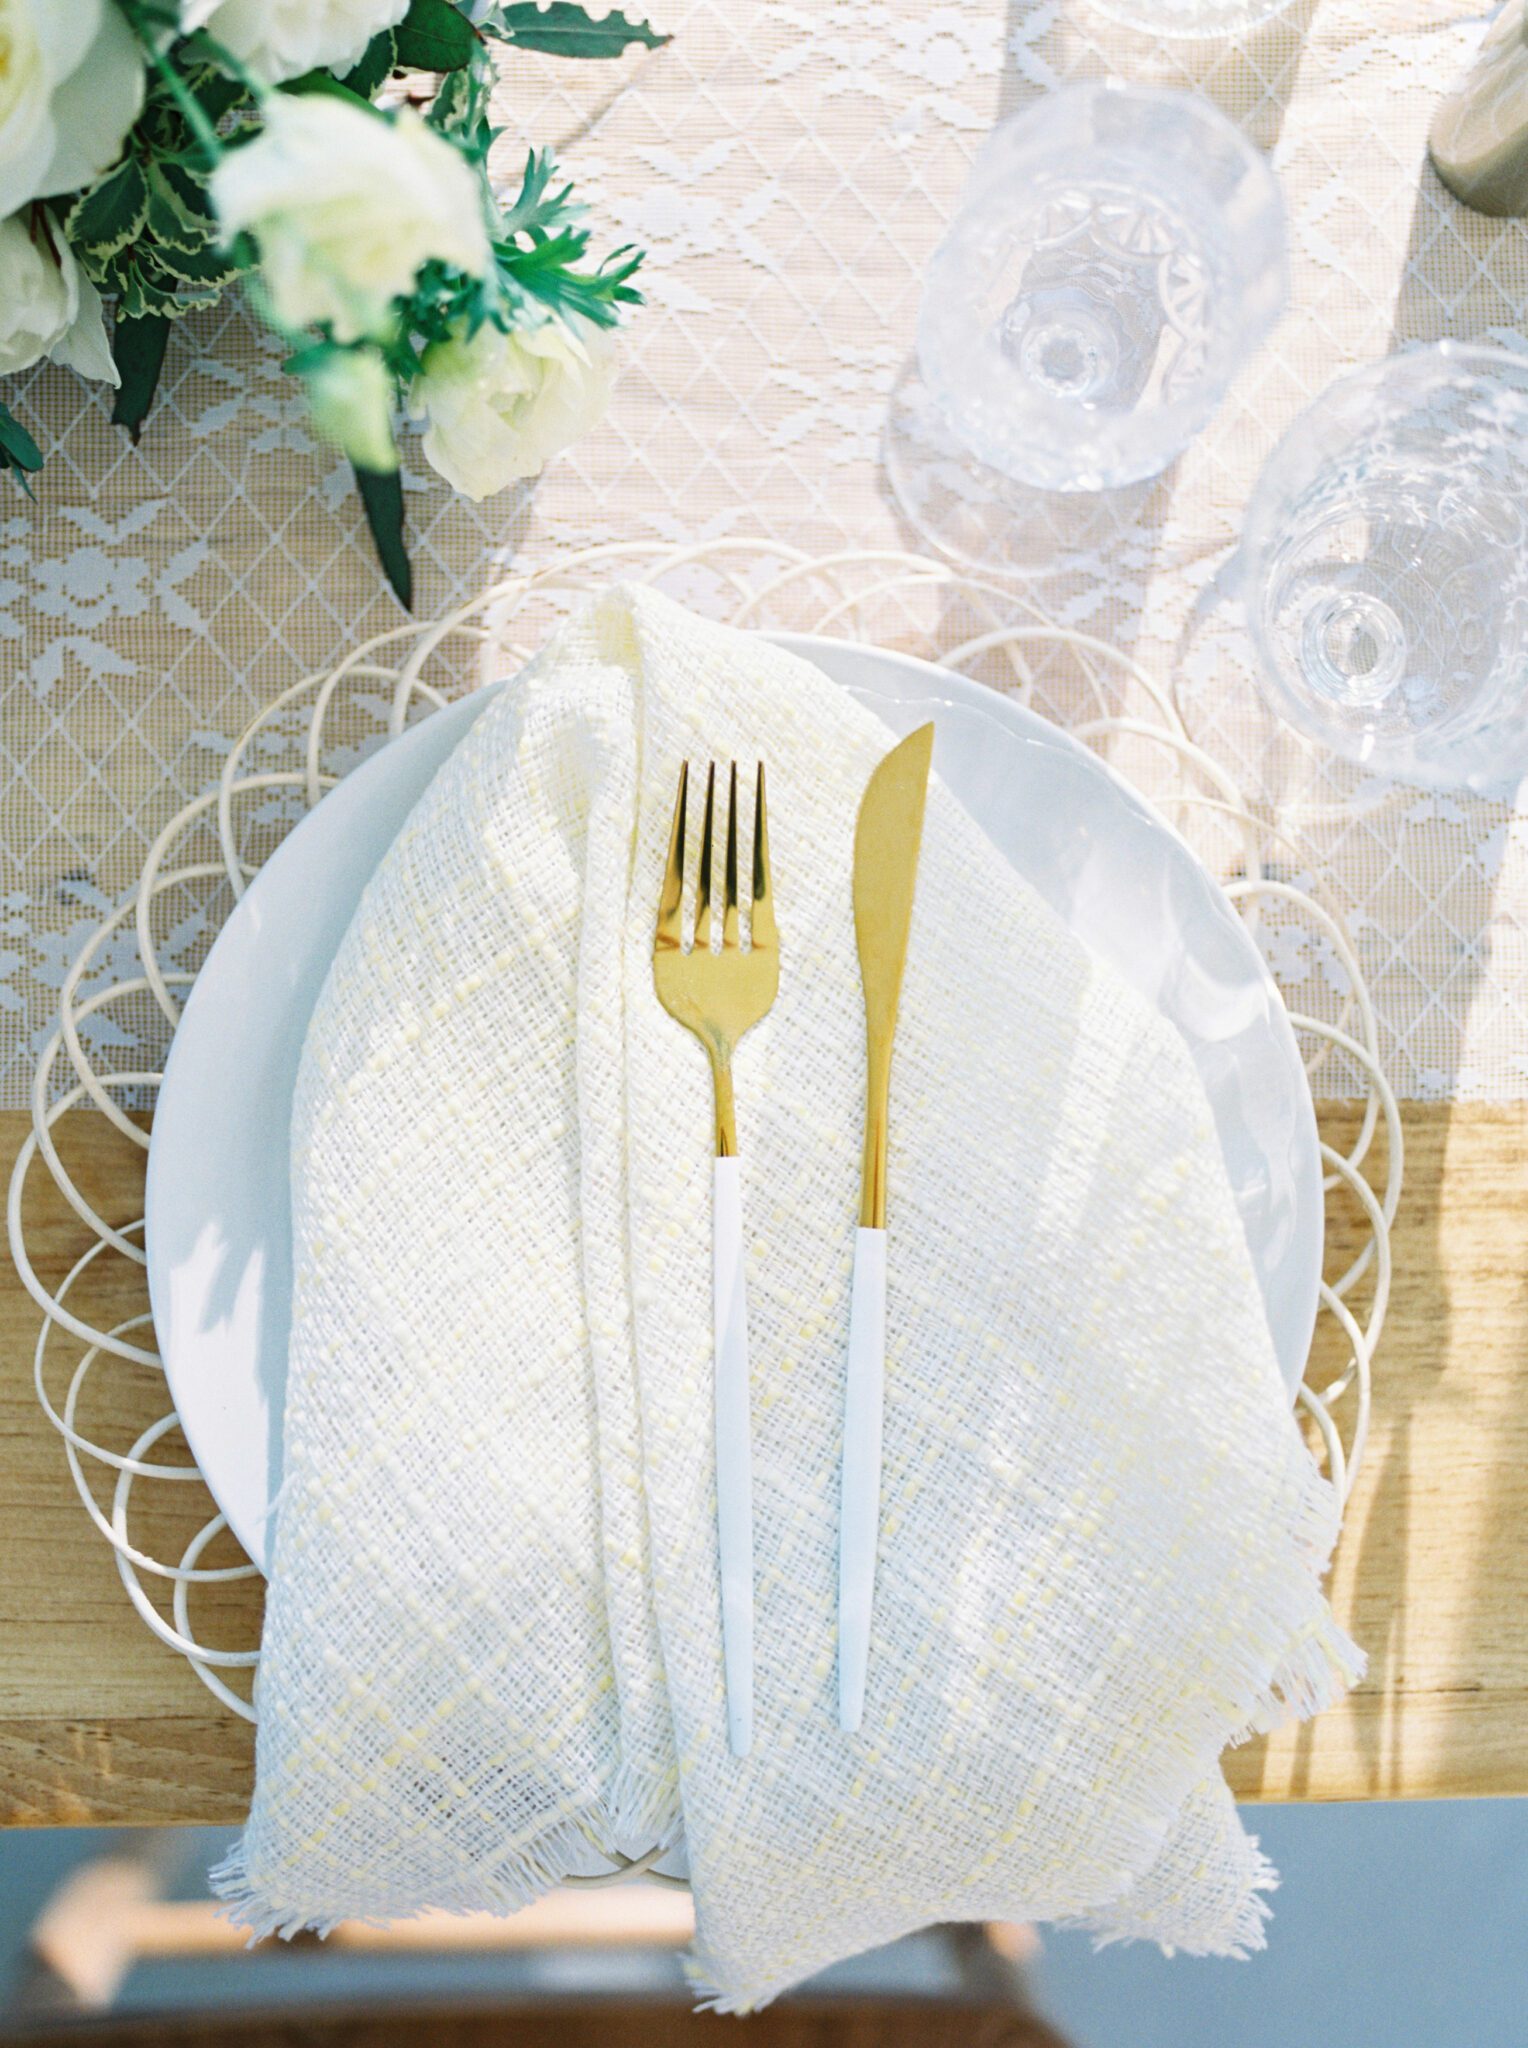 Elegant cottage core inspired wedding reception at Sparrow Lane Weddings and Events venue near Edmonton, Alberta. Fine art summer wedding. Outdoor summer wedding tablescape with lush florals in pale yellow, ivory and white with greenery. Wicker charger plates, and golden cutlery.